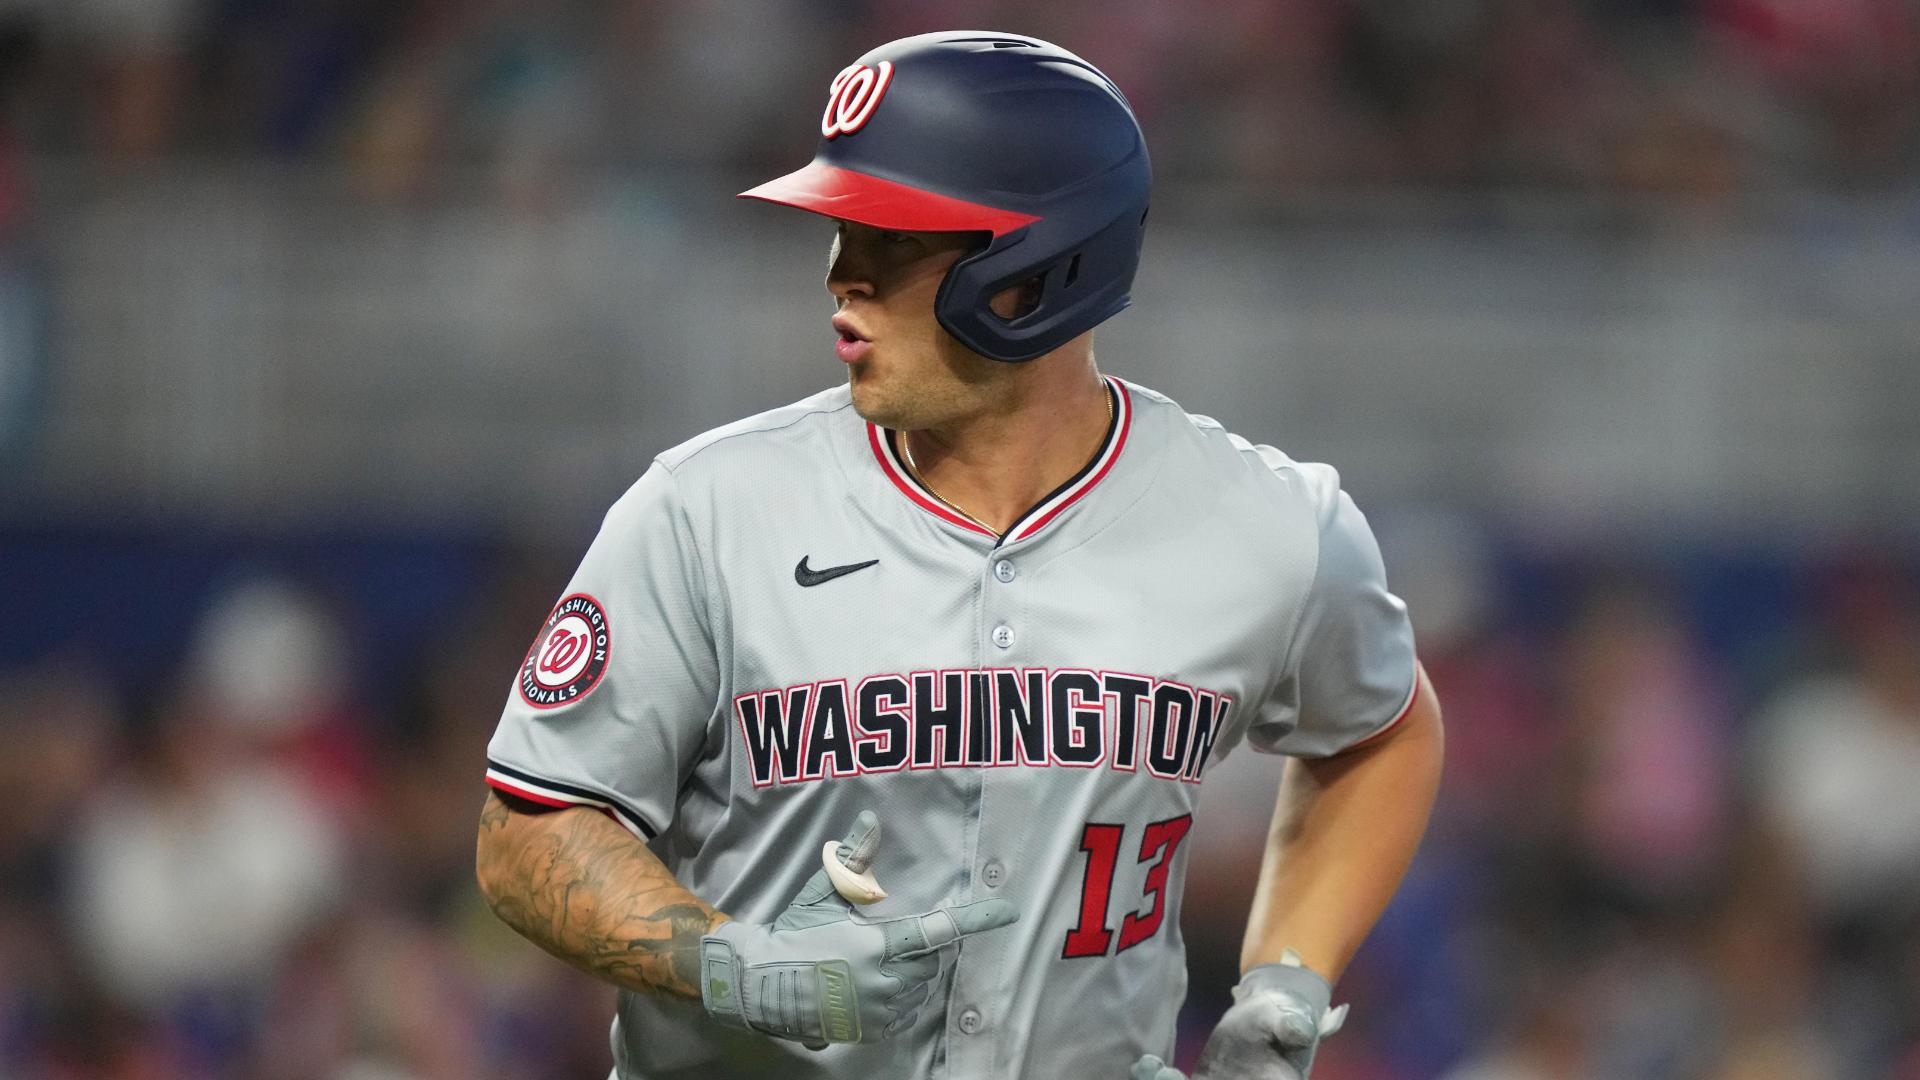 A pair of Nick Senzel homers help the Nationals overcome a 7-run deficit